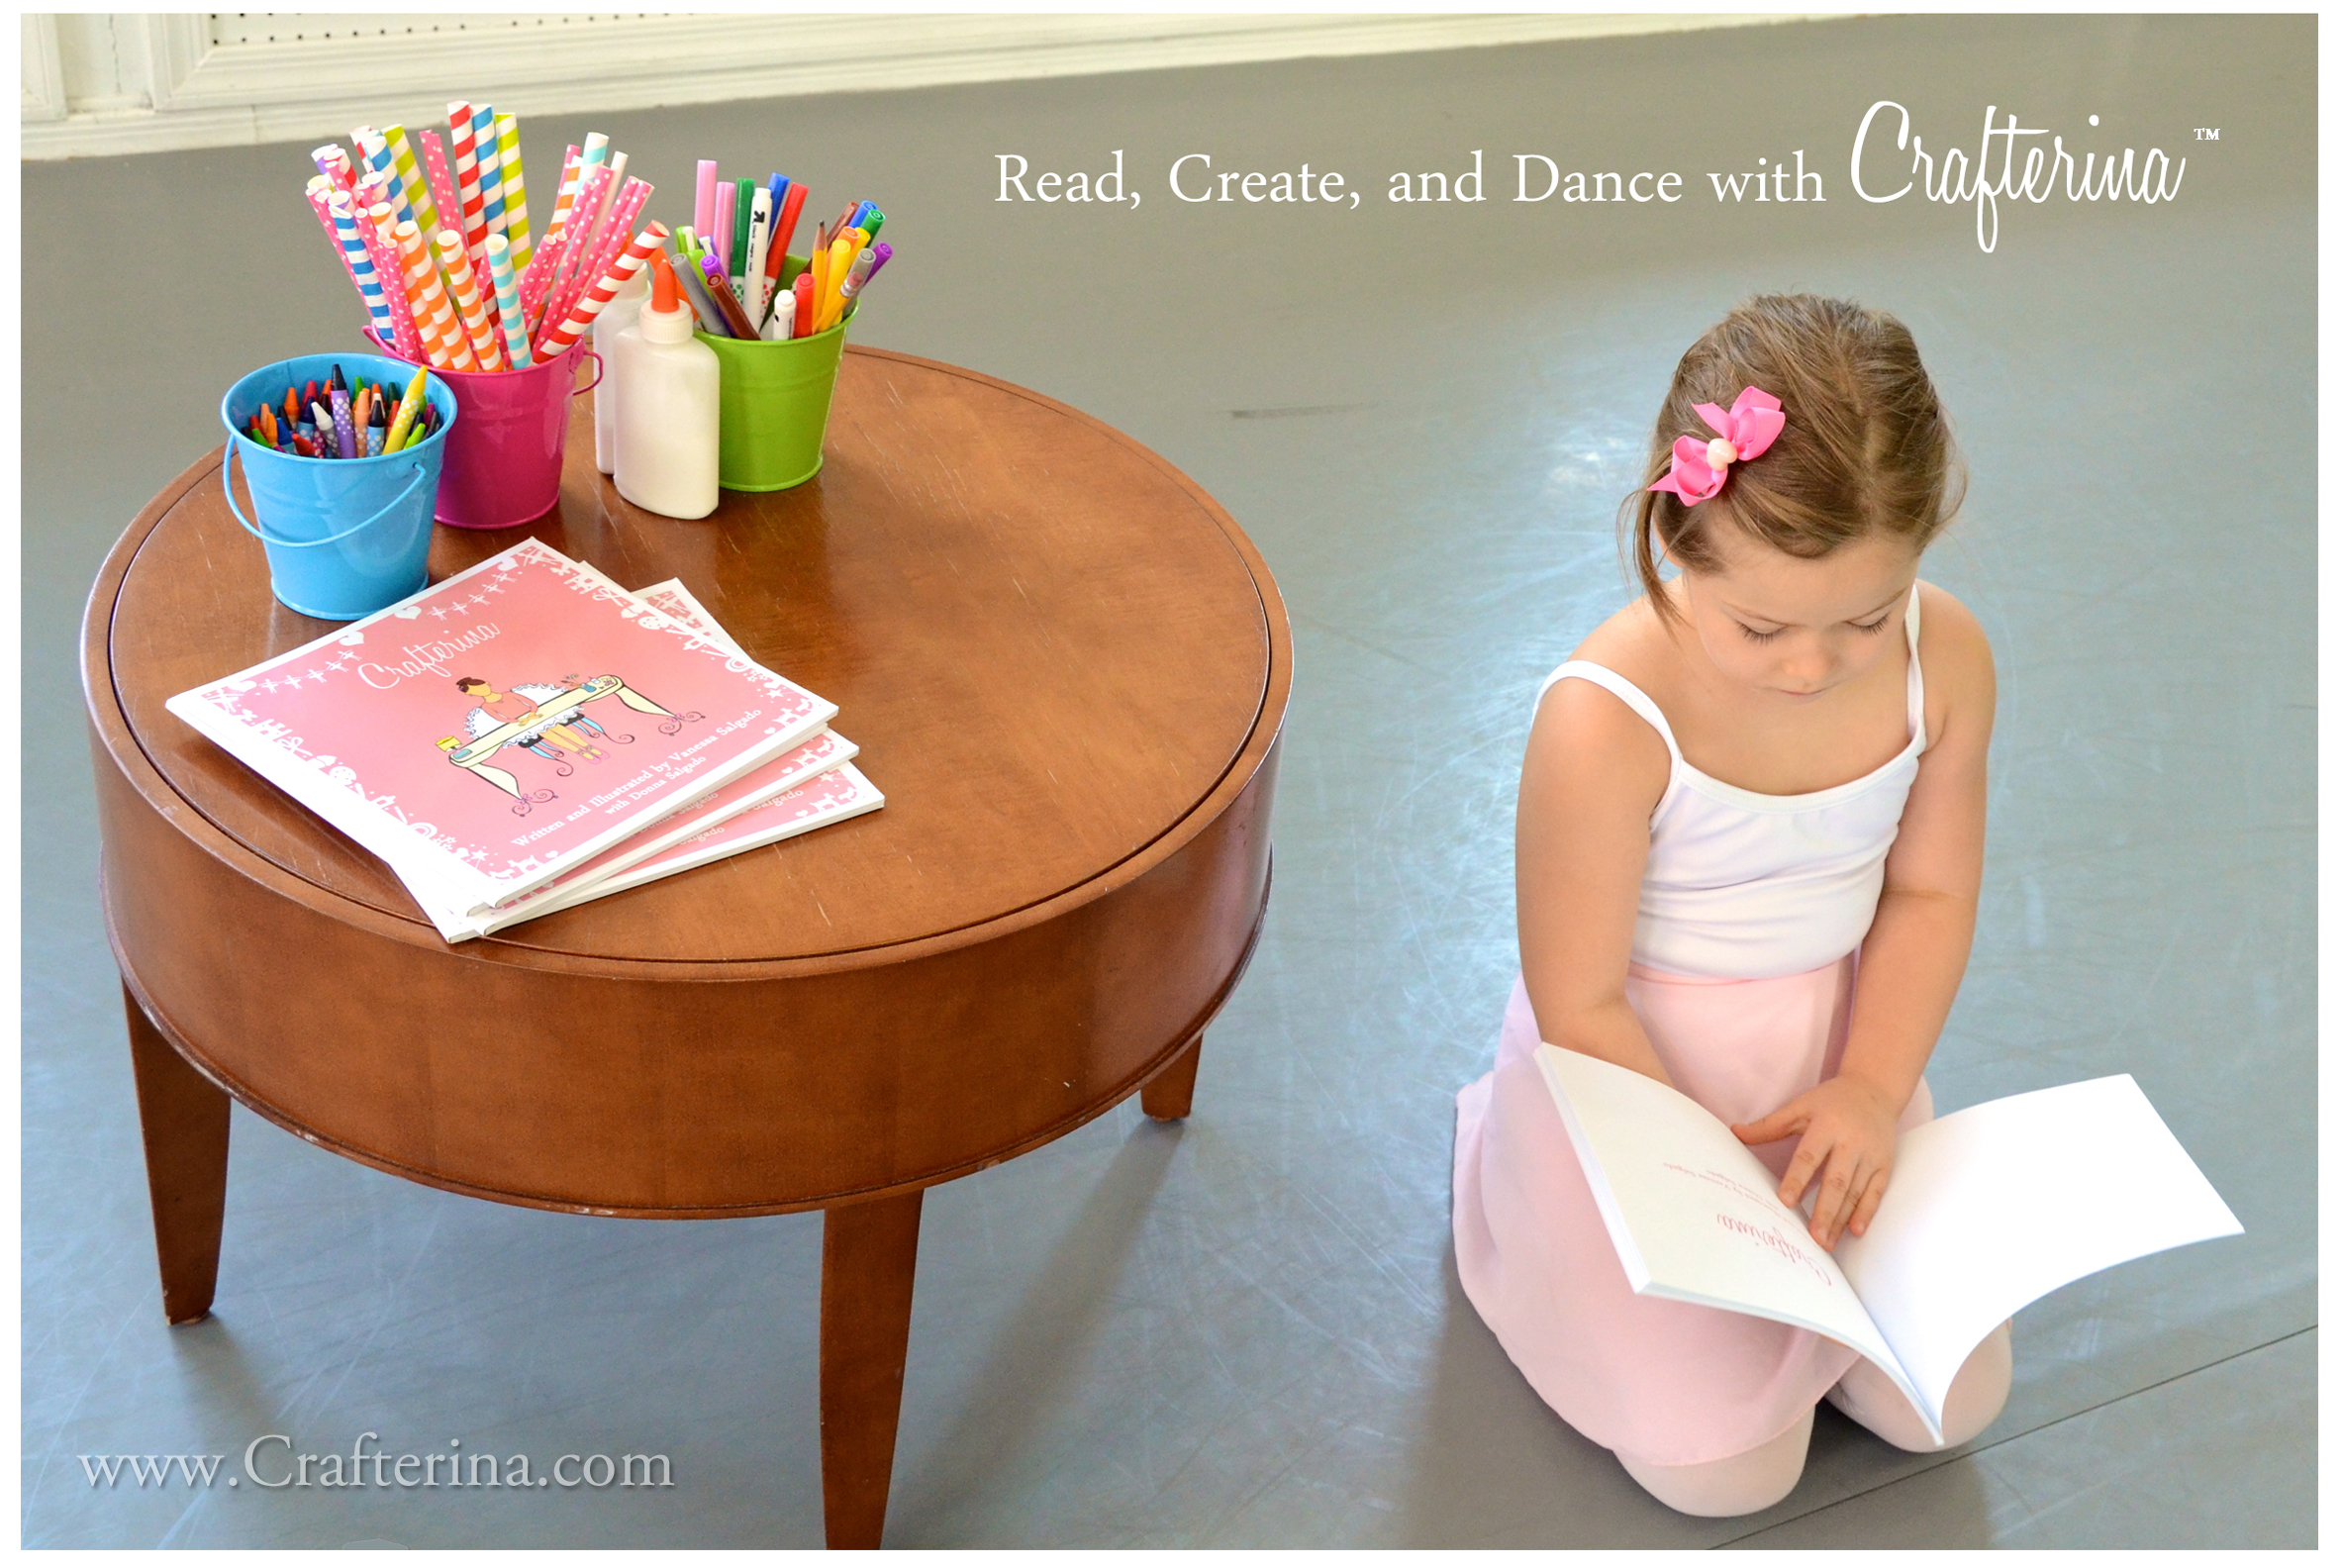 Read, Create, and Dance with Crafterina!